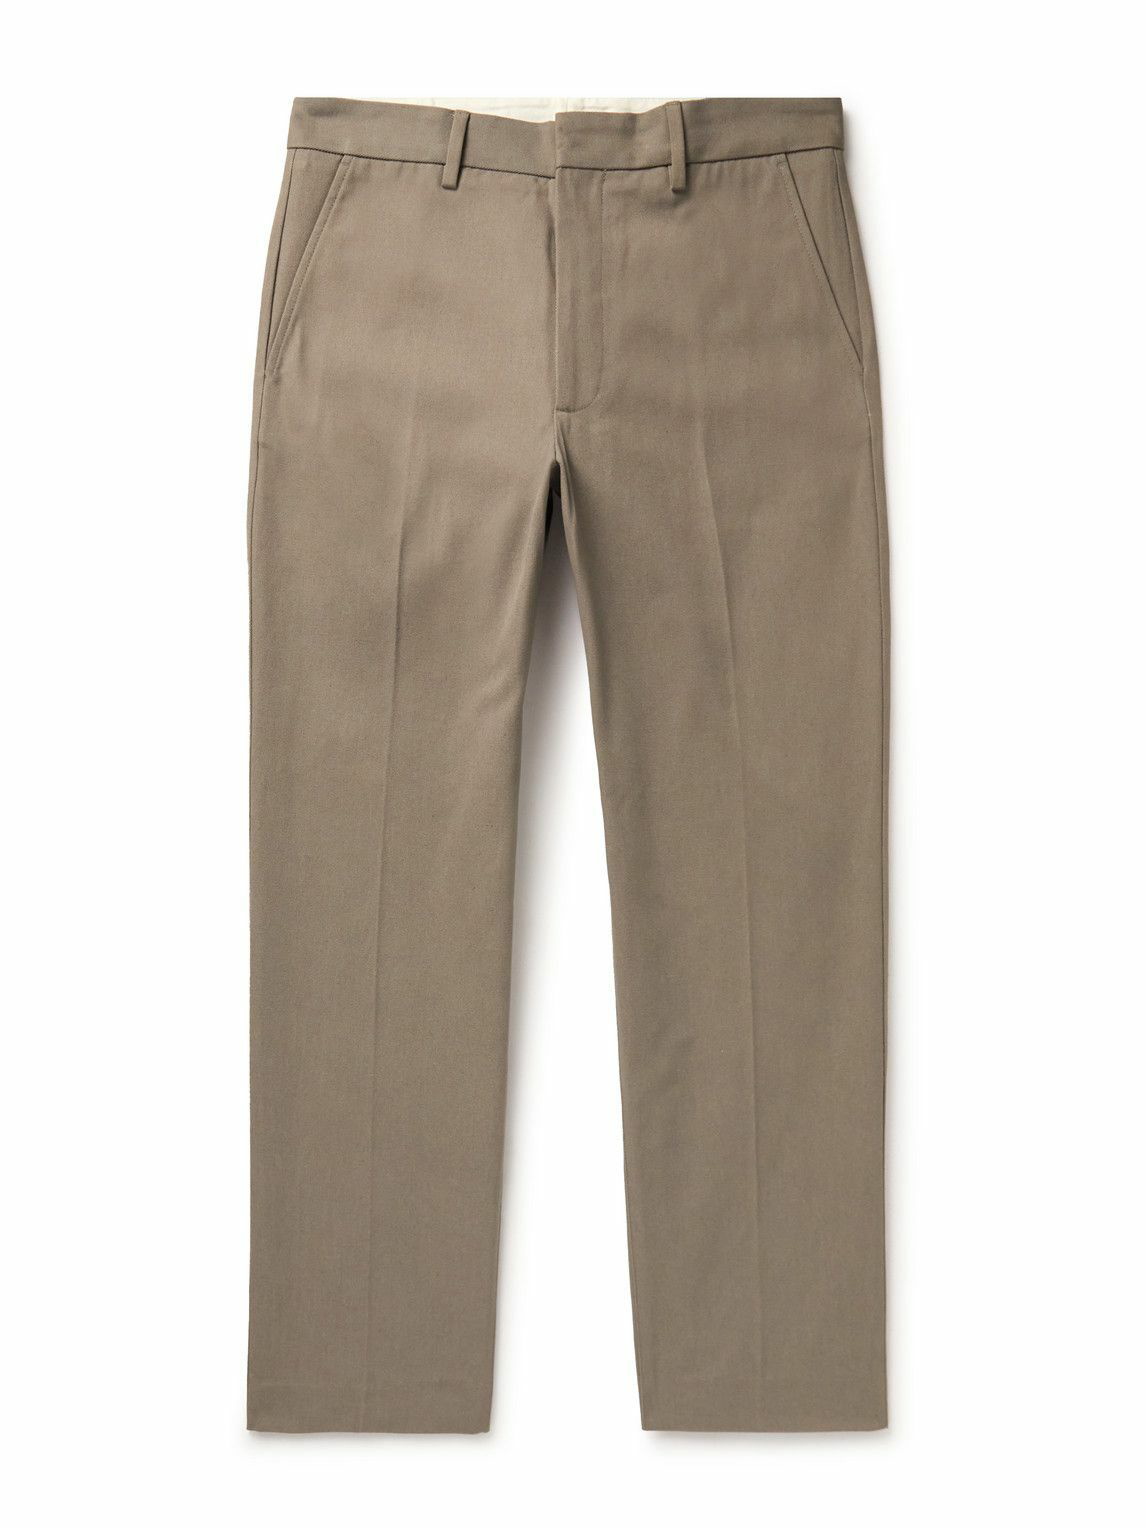 Acne Studios - Ayonne Straight-Leg Cotton-Blend Twill Trousers